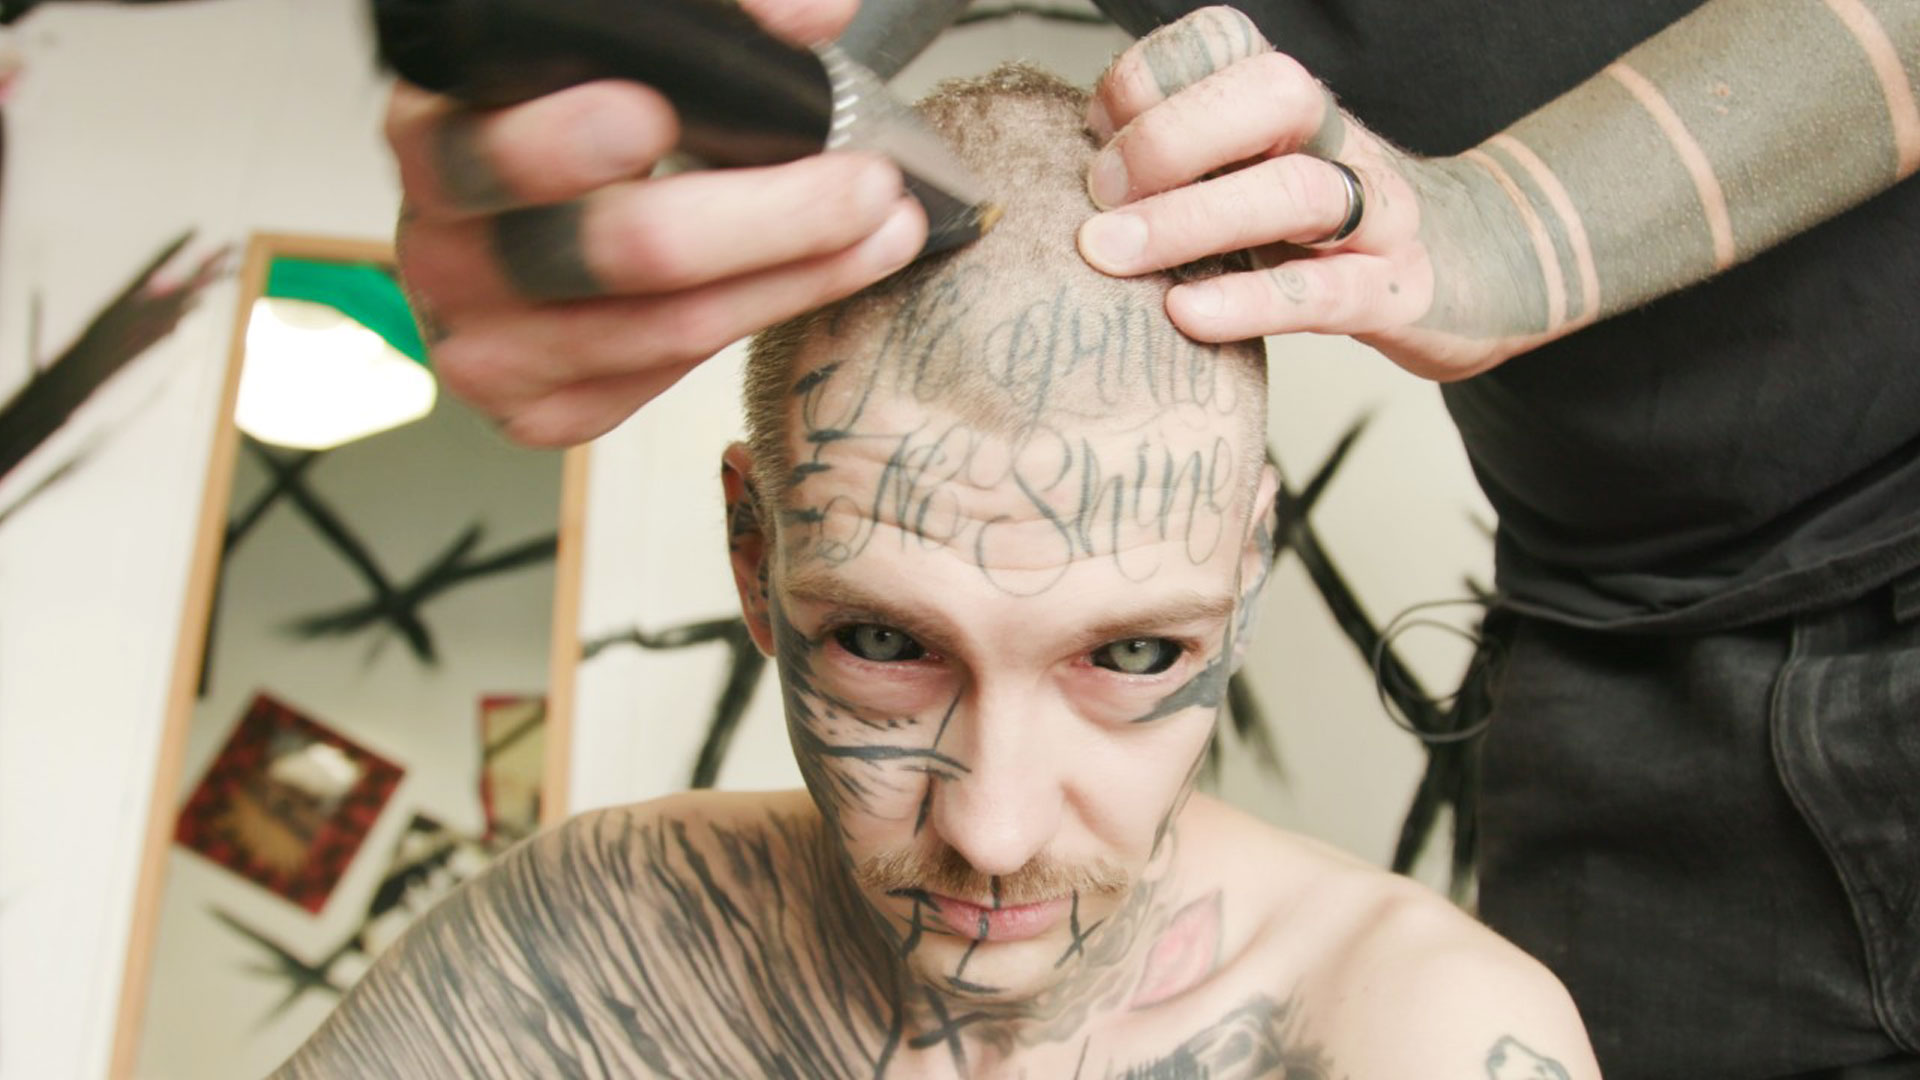 The Brutal Tattoo Ritual Built on Pain - VICE Video: Documentaries, Films, News Videos